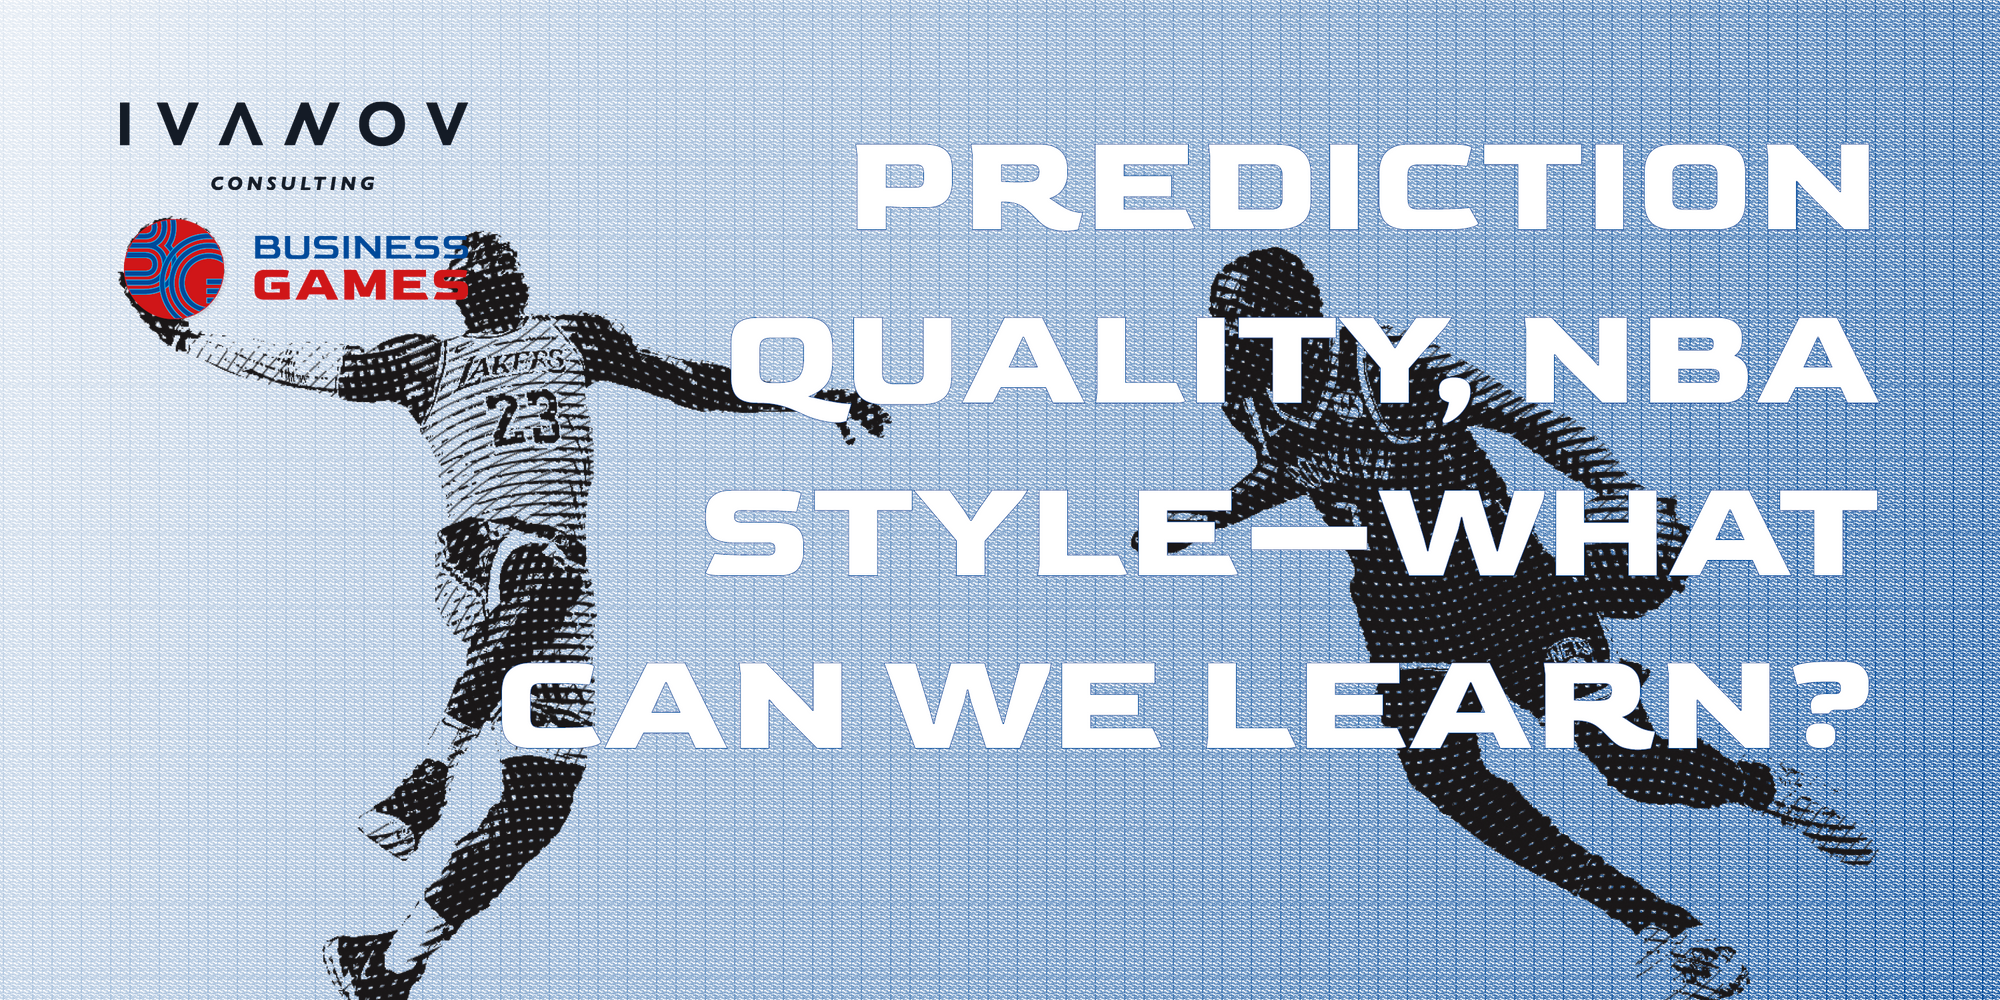 Cover for Prediction Quality, NBA Style: What Can We Learn for Decision-Making?